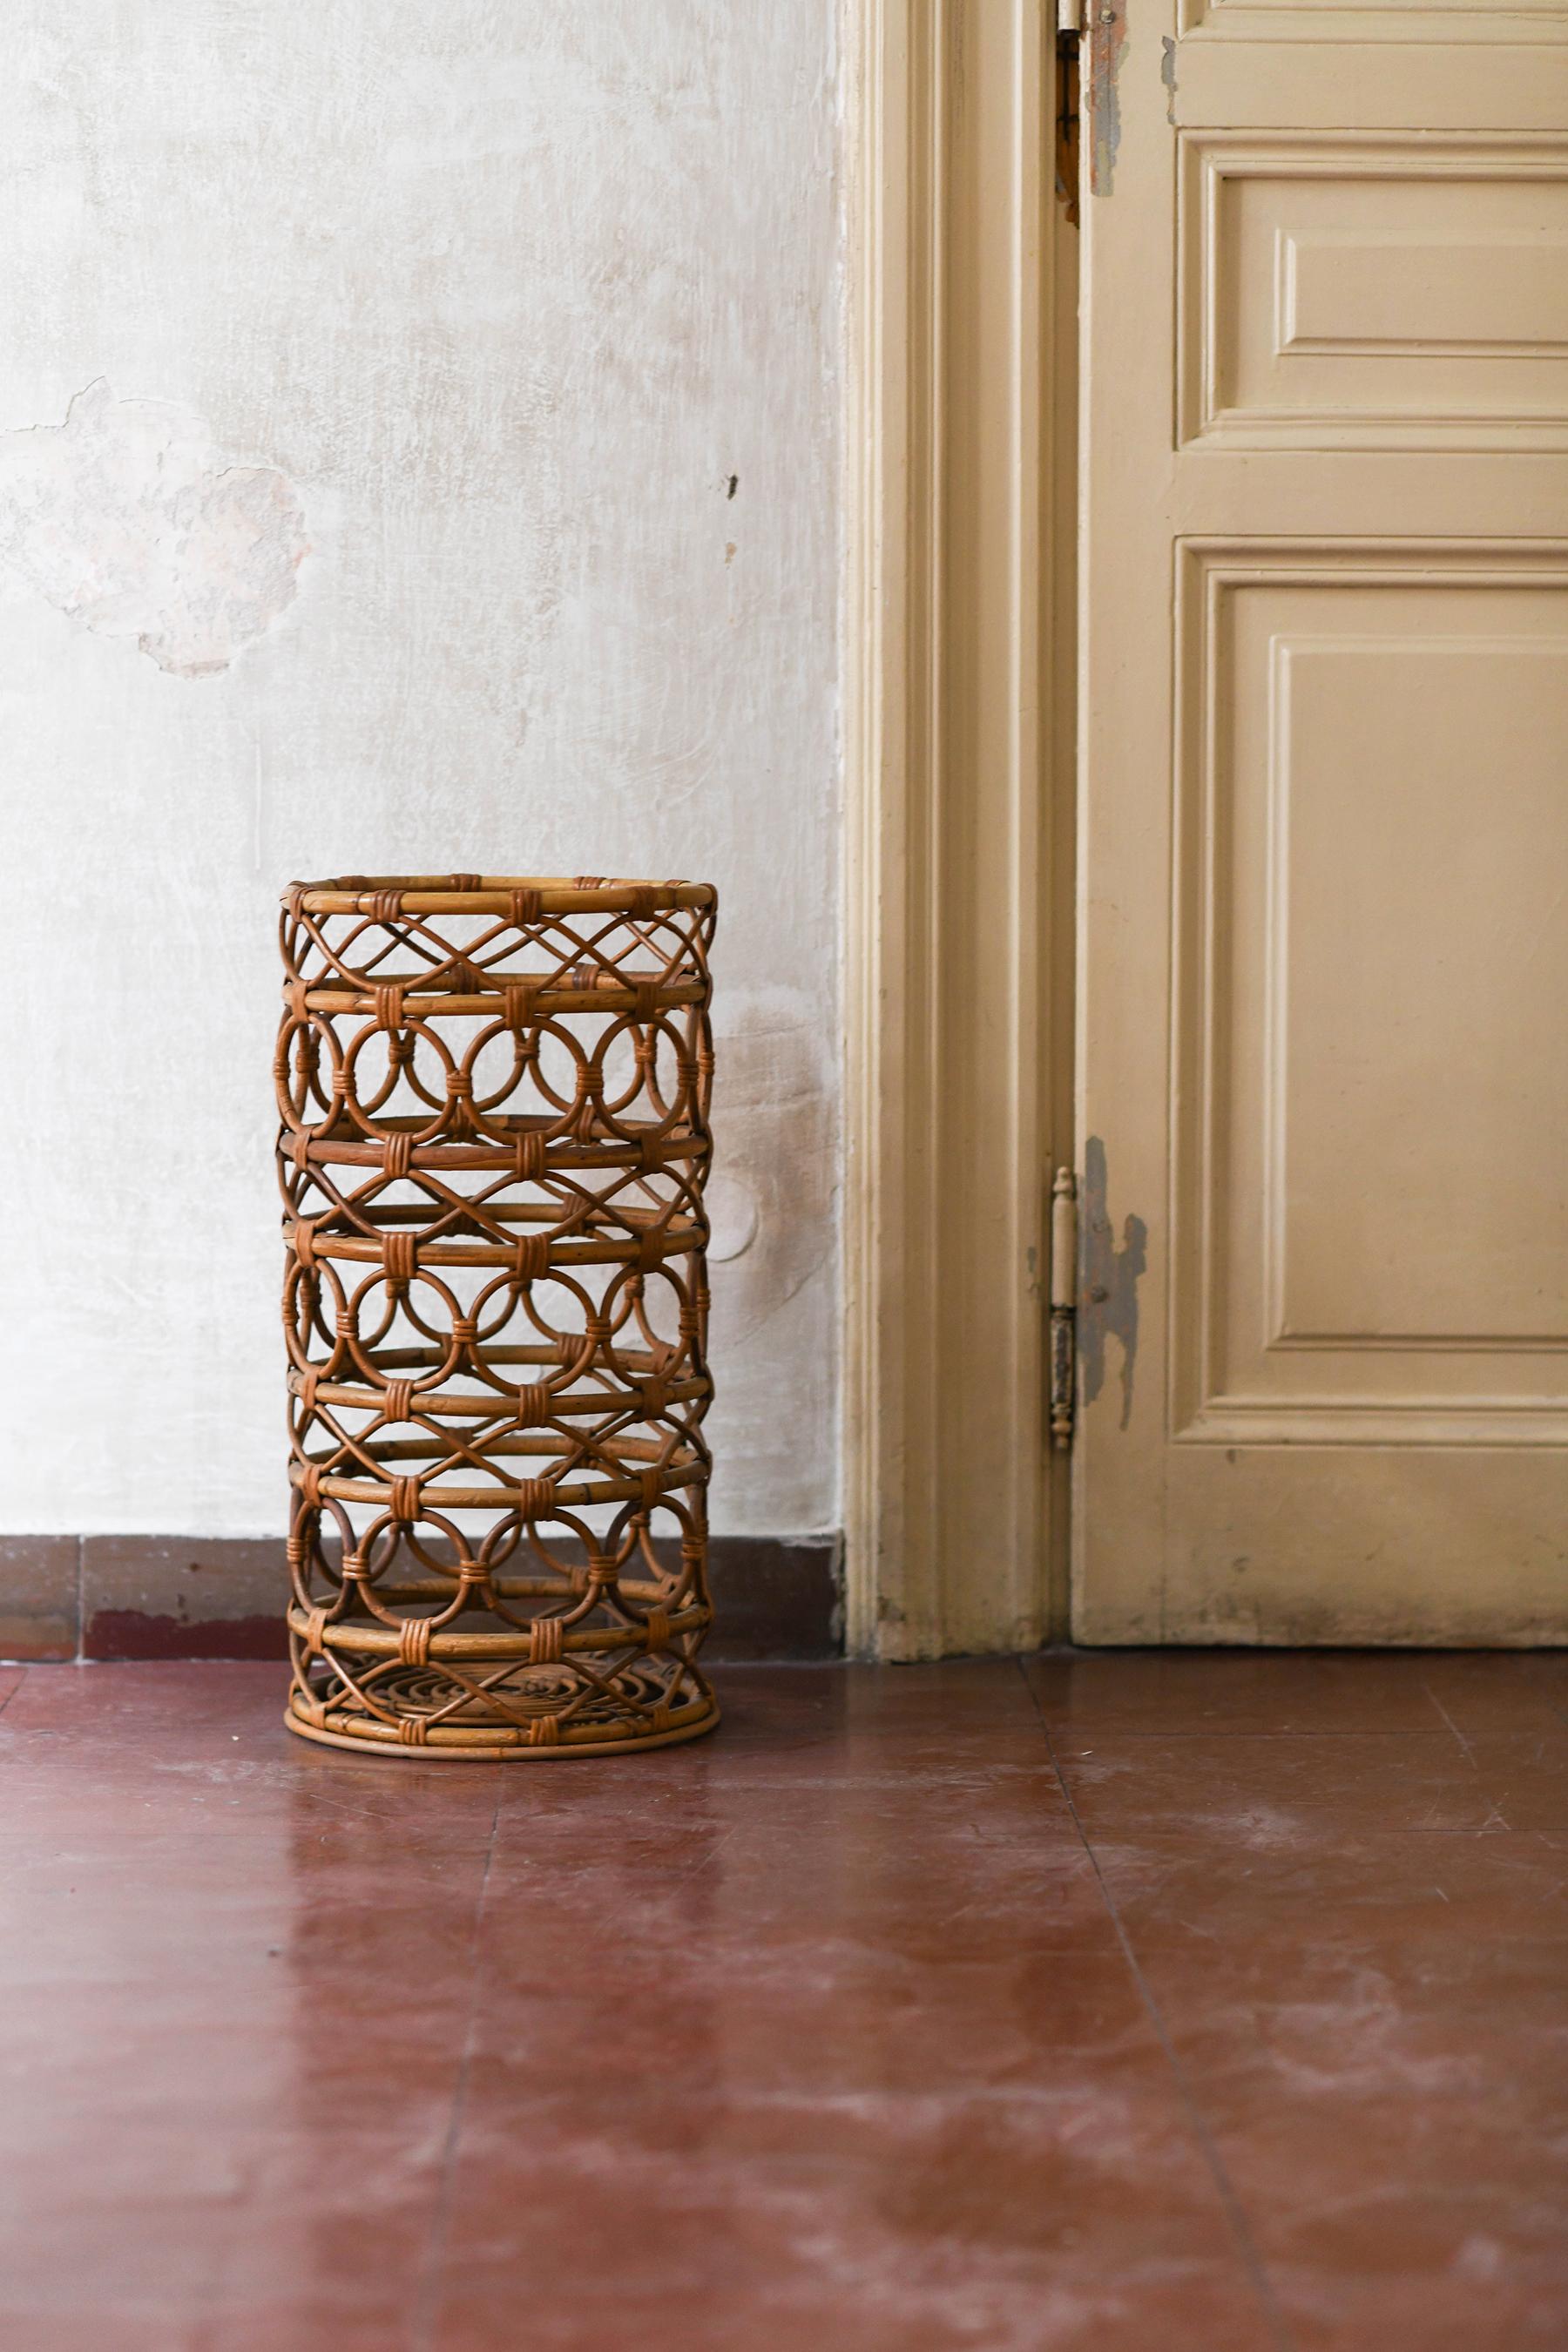 Rattan umbrella stand with geometric motifs, Italy 1980
Product details
Dimensions 60 H x 30 D cm